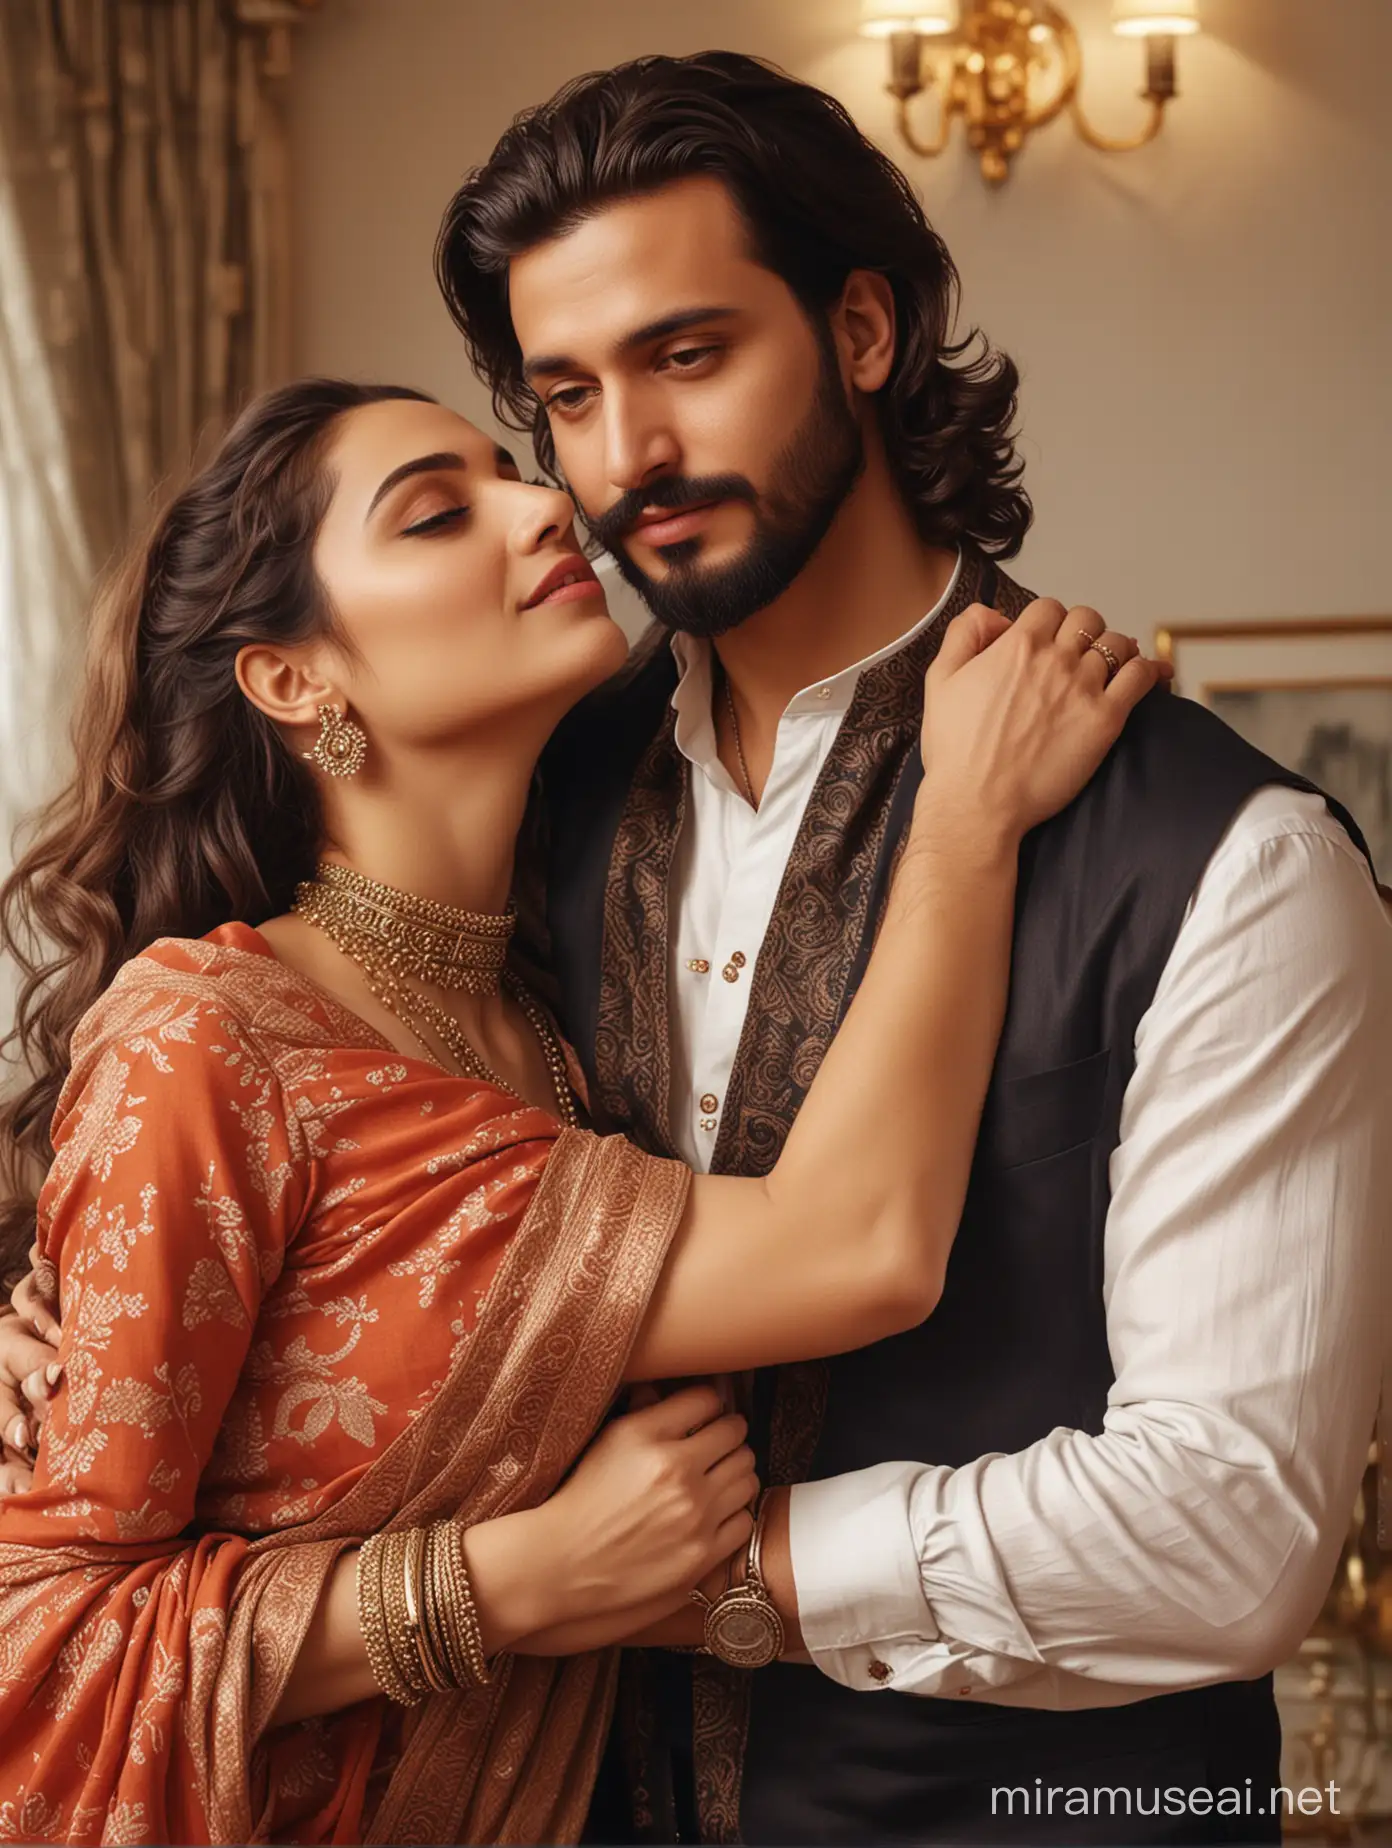 full body view  of most beautiful european couple as most beautiful indian couple, most beautiful girl in elegant bold color saree and long curly hairs, hairs tied  up with hair style stylishly, necklace,   big wide black  eyes, full face, makeup, low cut neck, girl embracing with emotion and possessive feeling, pressing face to chest of man, emotional crying with longing feeling, innocence and ecstasy, hands around man neck, man comforting her,  man with stylish beard, perfect hair cut, formals, photo realistic, 4k.
background,spacious modern elite photo room, with luxury sofa set, cream color carpet, elegant interior designs, vintage lamps, romantic reunion ambience, photorealistic, vibrant colors, intricate details, 8k.